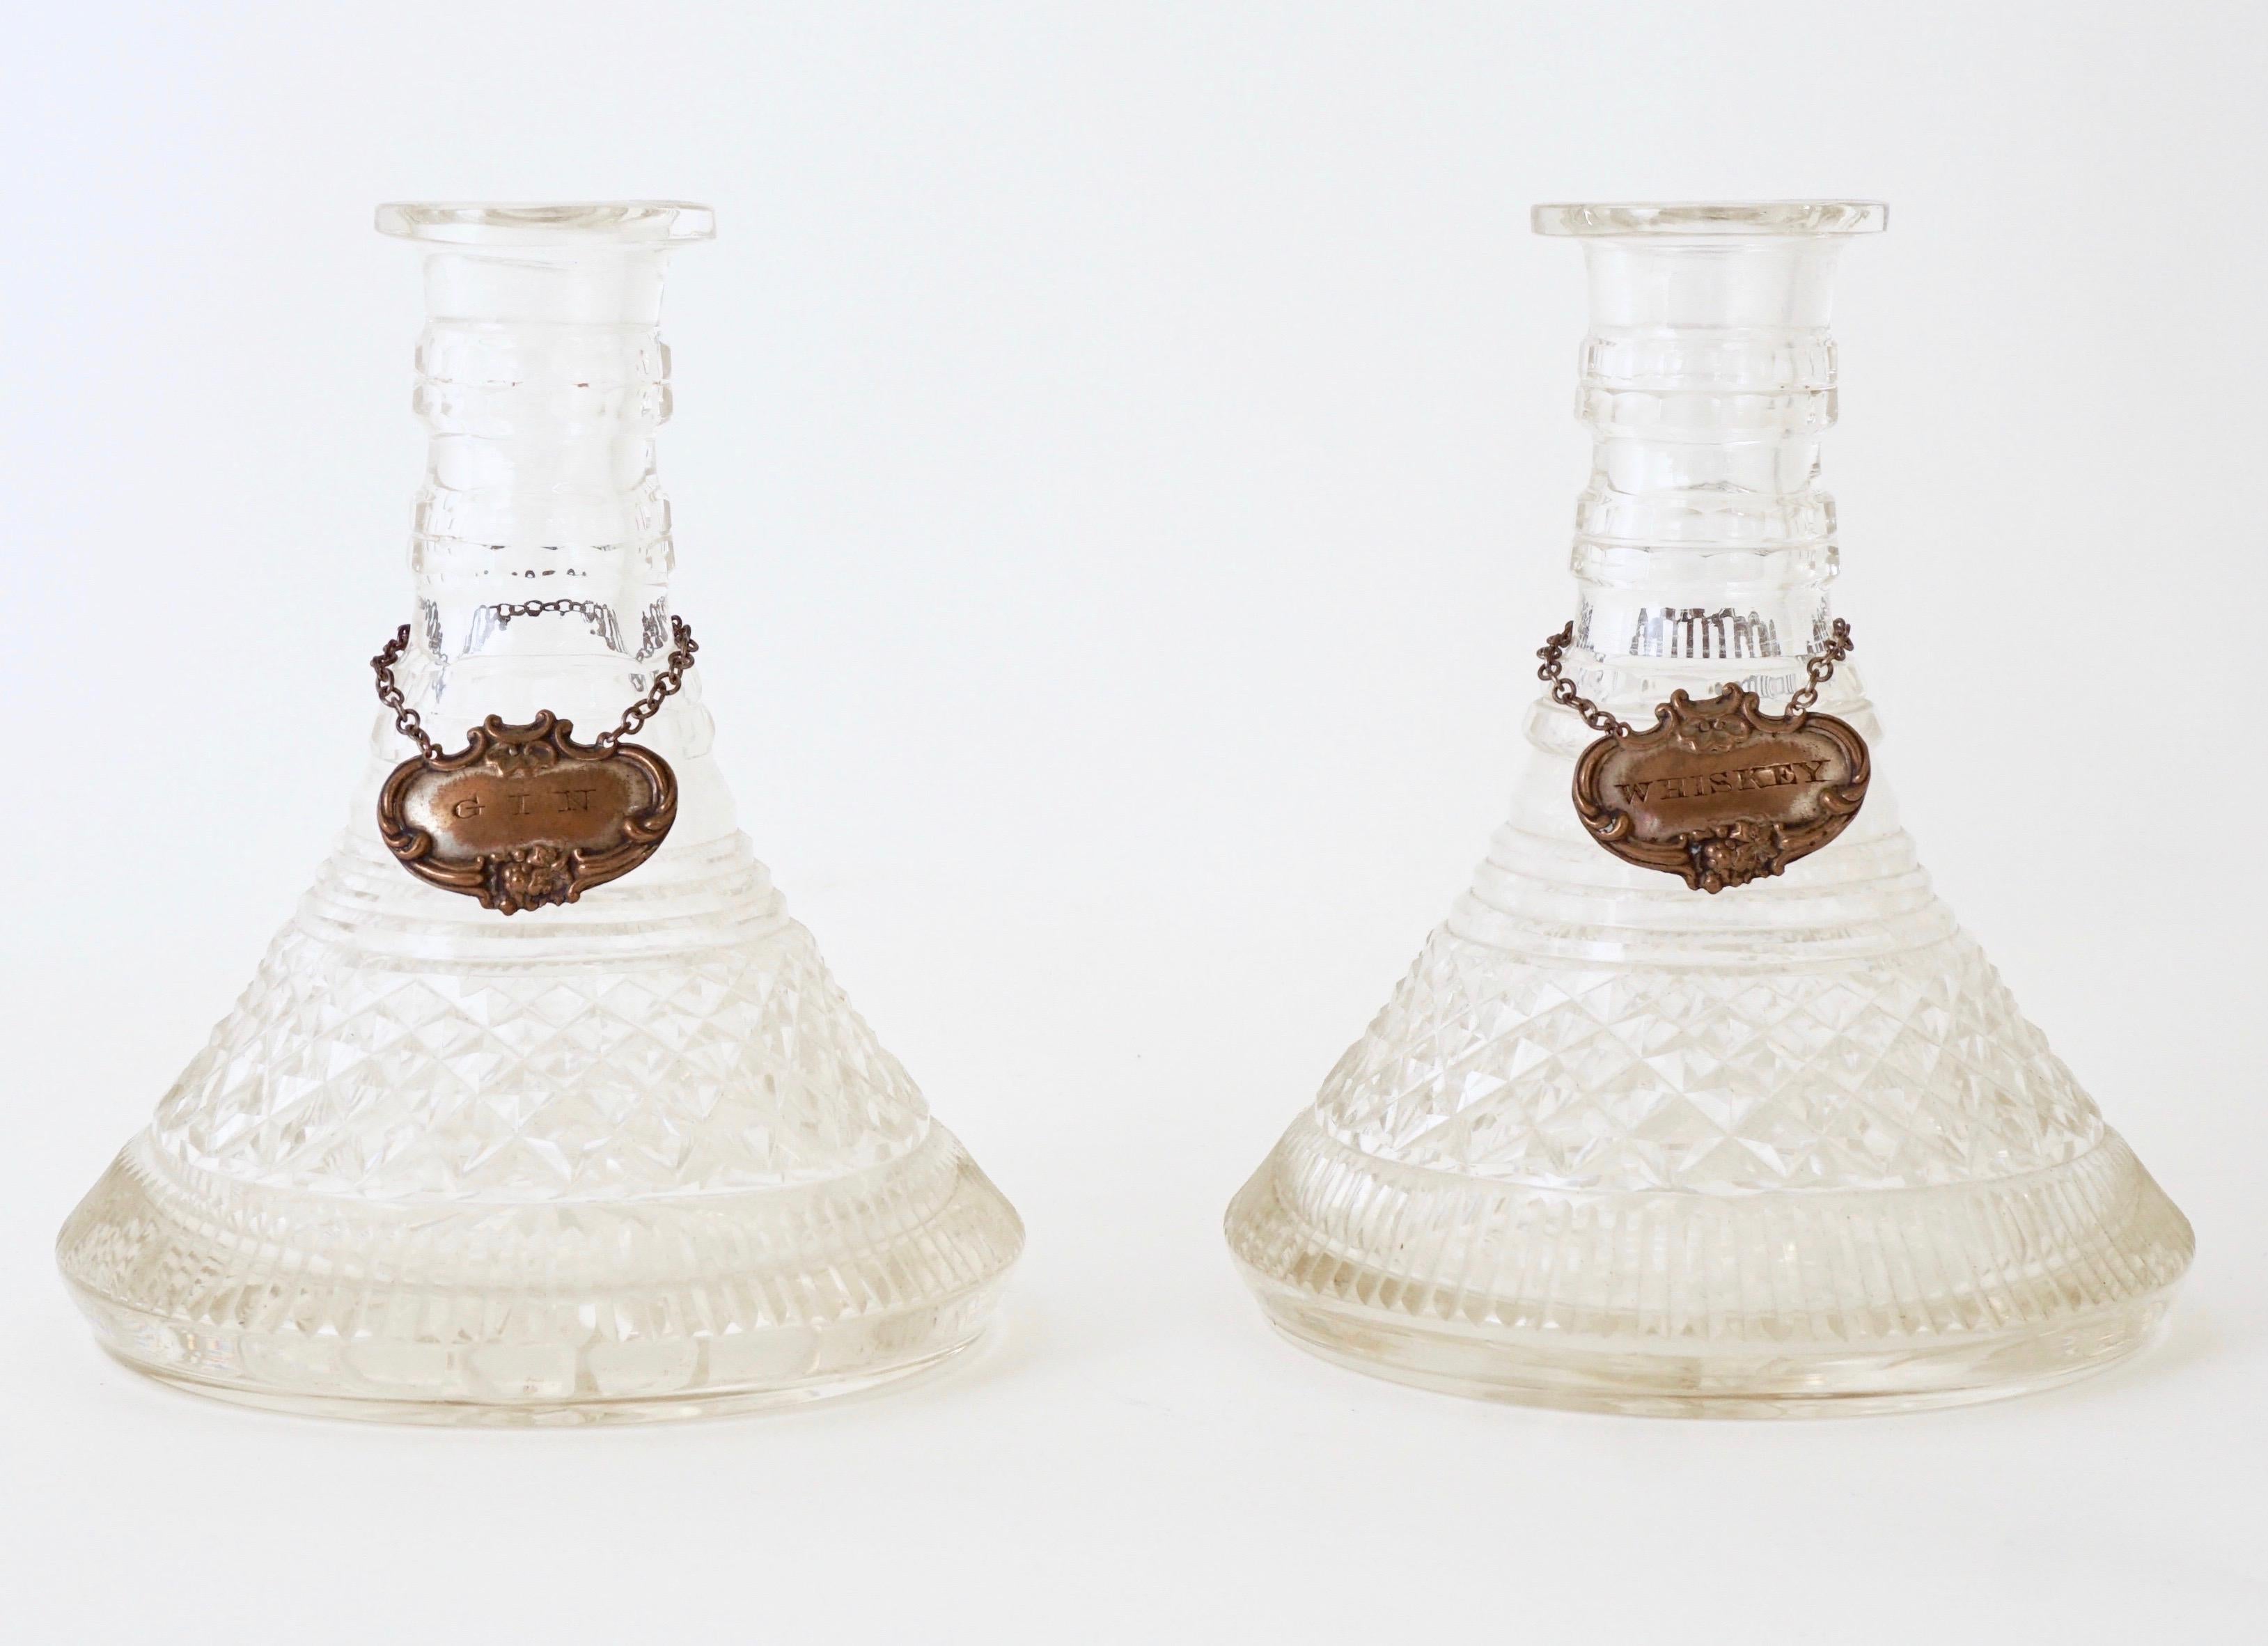 Gorgeous gin and whiskey crystal decanters from the 1800s. These magnificent pair were designed for use on ships. The wide bottoms were to keep them stable when the ship lists. They were likely used in a Captain's stateroom. 